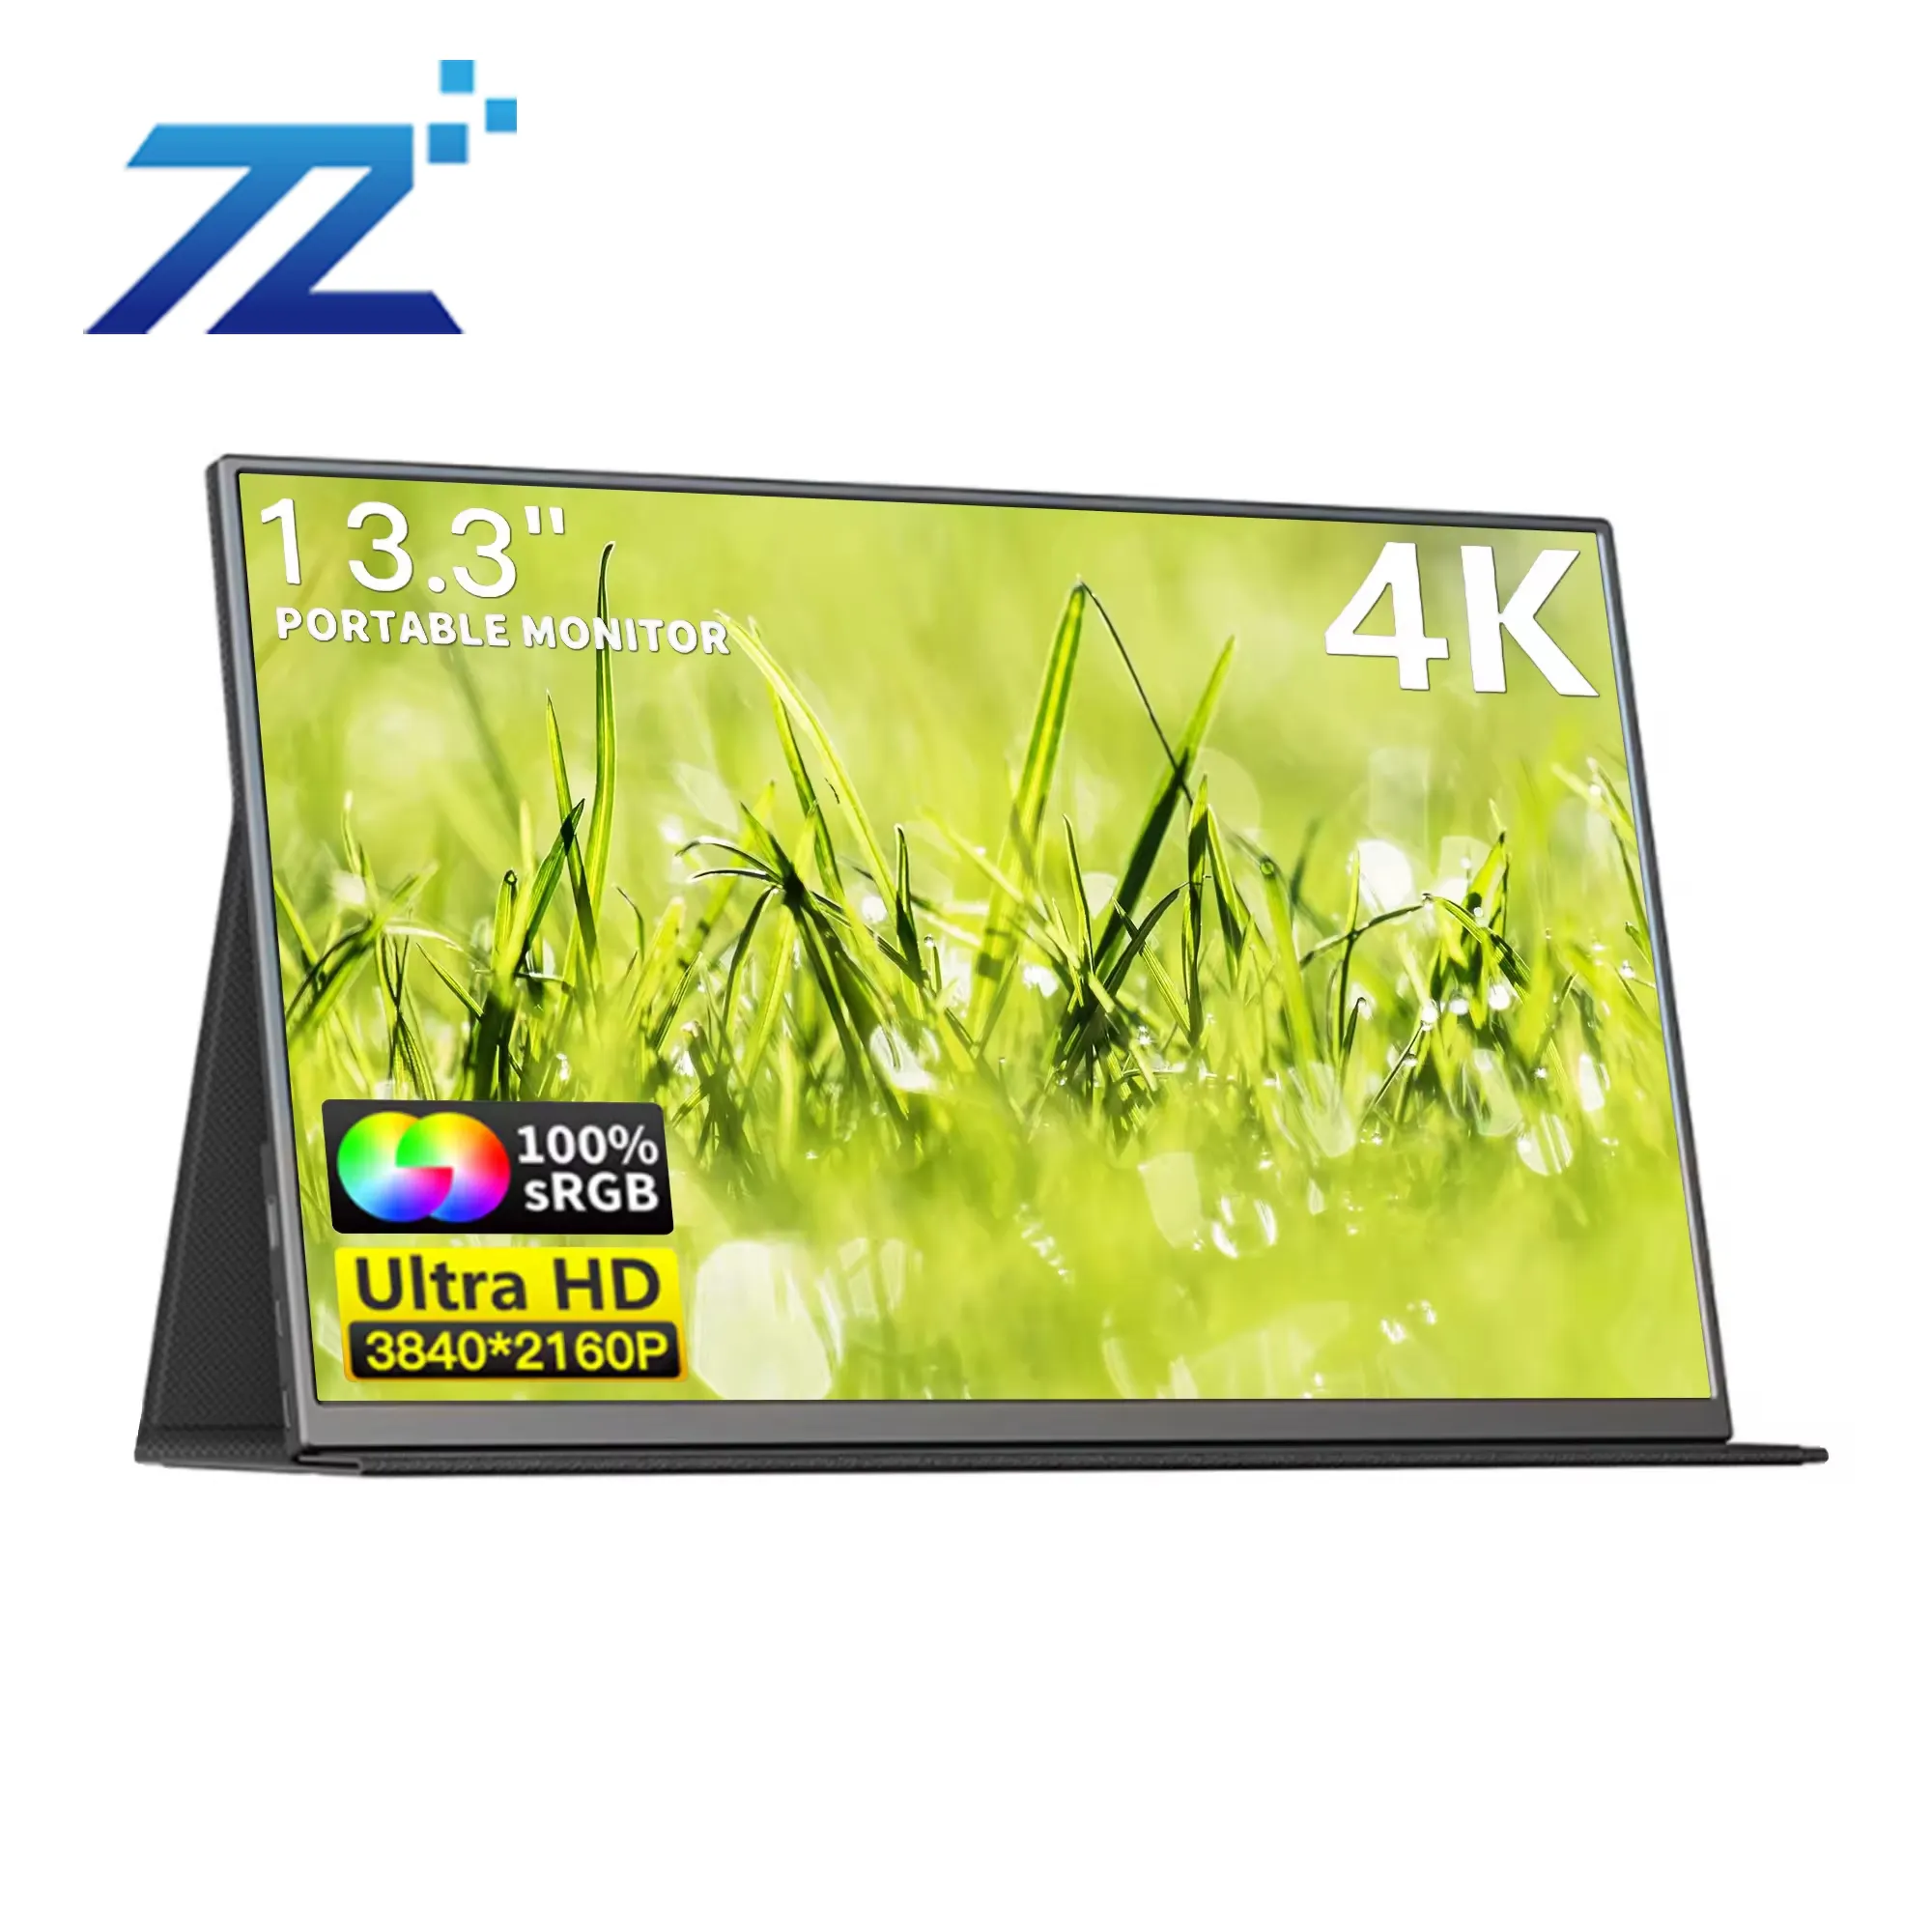 New Portable 16" 100% sRGB Screen 1080P Gaming Monitor 144hz Extended Laptop 16:9 Widescreen IPS LCD Panel Type C Interface